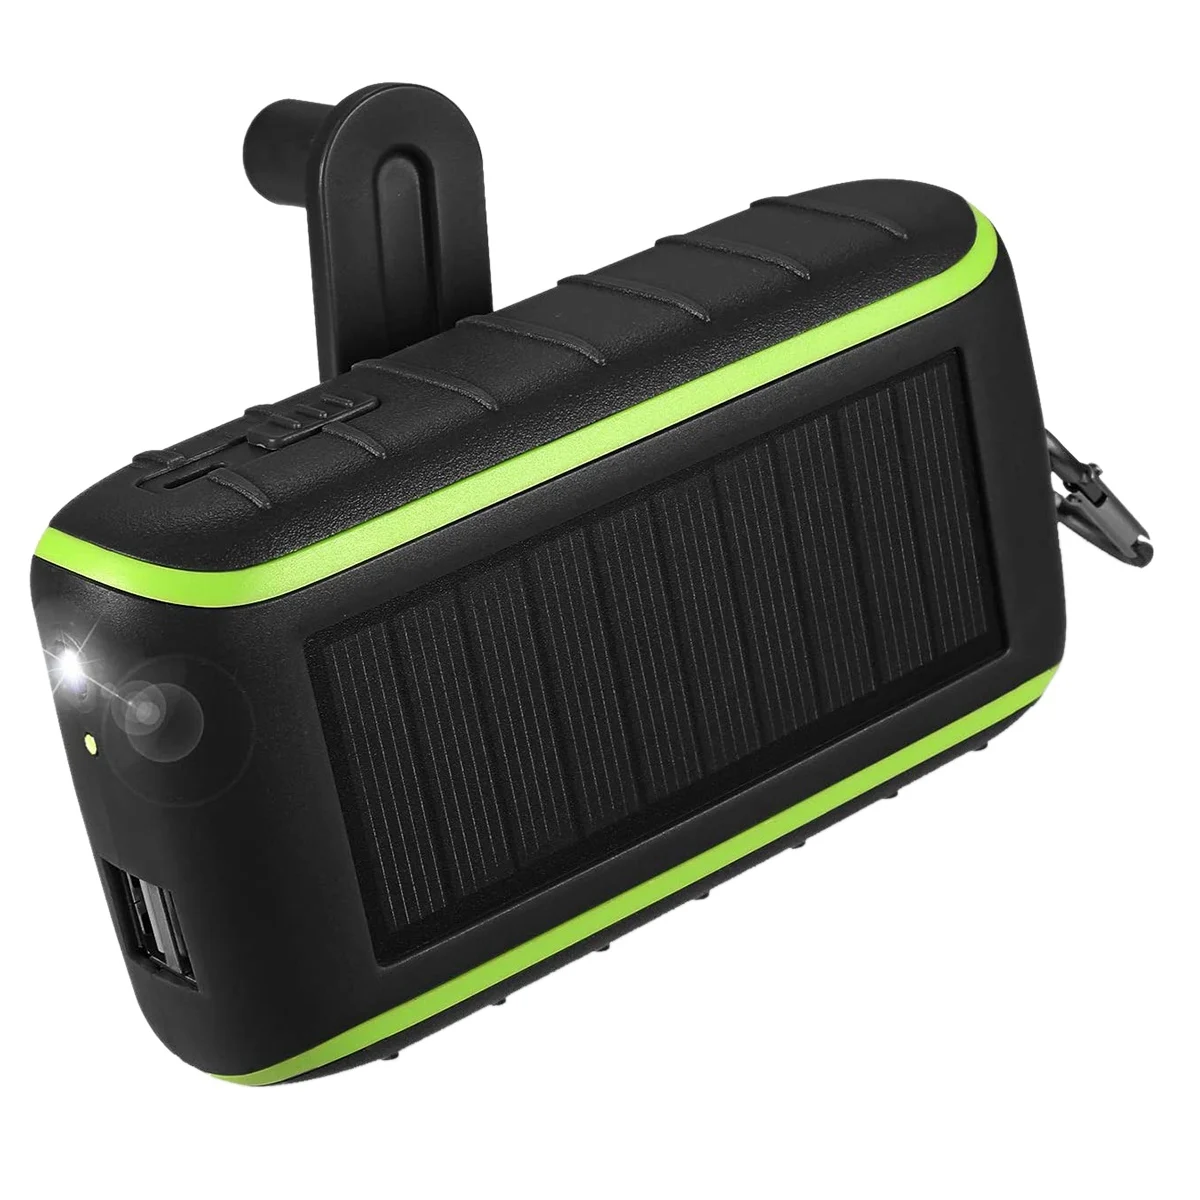 

Solar Charger, 8000mAh Portable Hand Crank Phone Charger 2 USB Ports Solar Power Bank with LED Flashlight, Carabiner